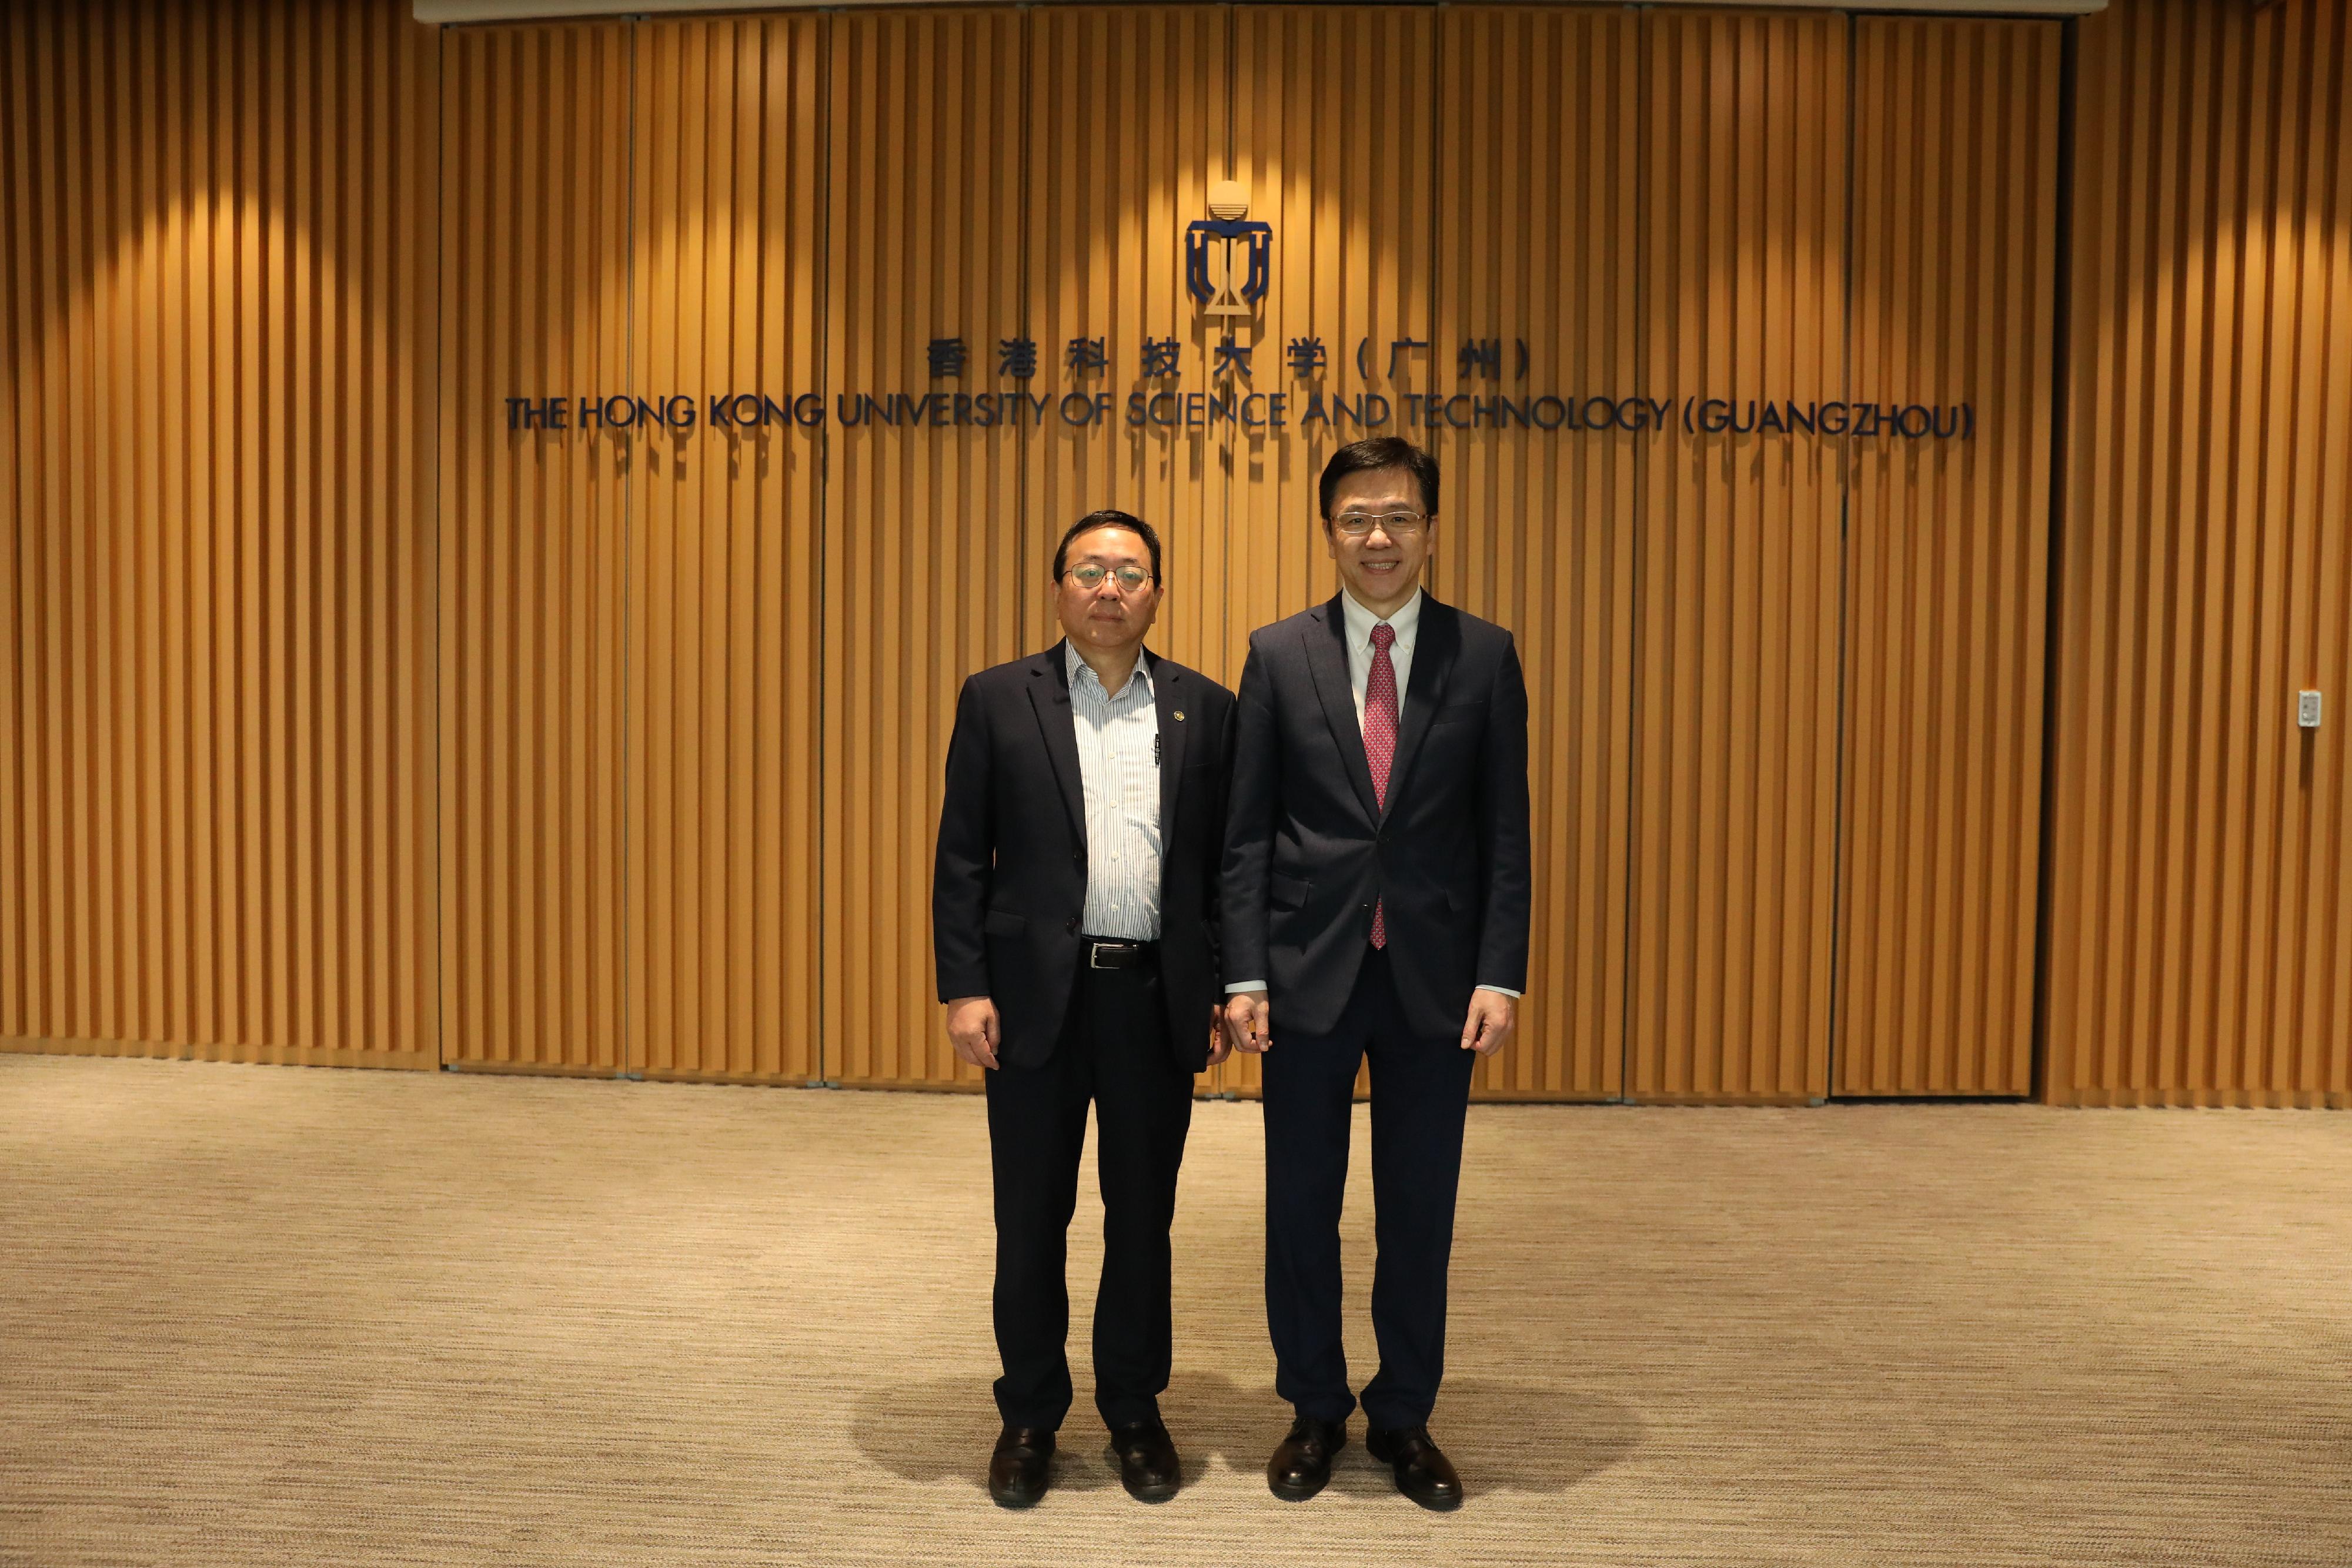 The Secretary for Innovation, Technology and Industry, Professor Sun Dong (right), visits the Hong Kong University of Science and Technology (HKUST) (Guangzhou) today (March 31) and is pictured with the President of the HKUST (Guangzhou), Professor Lionel Ni (left).